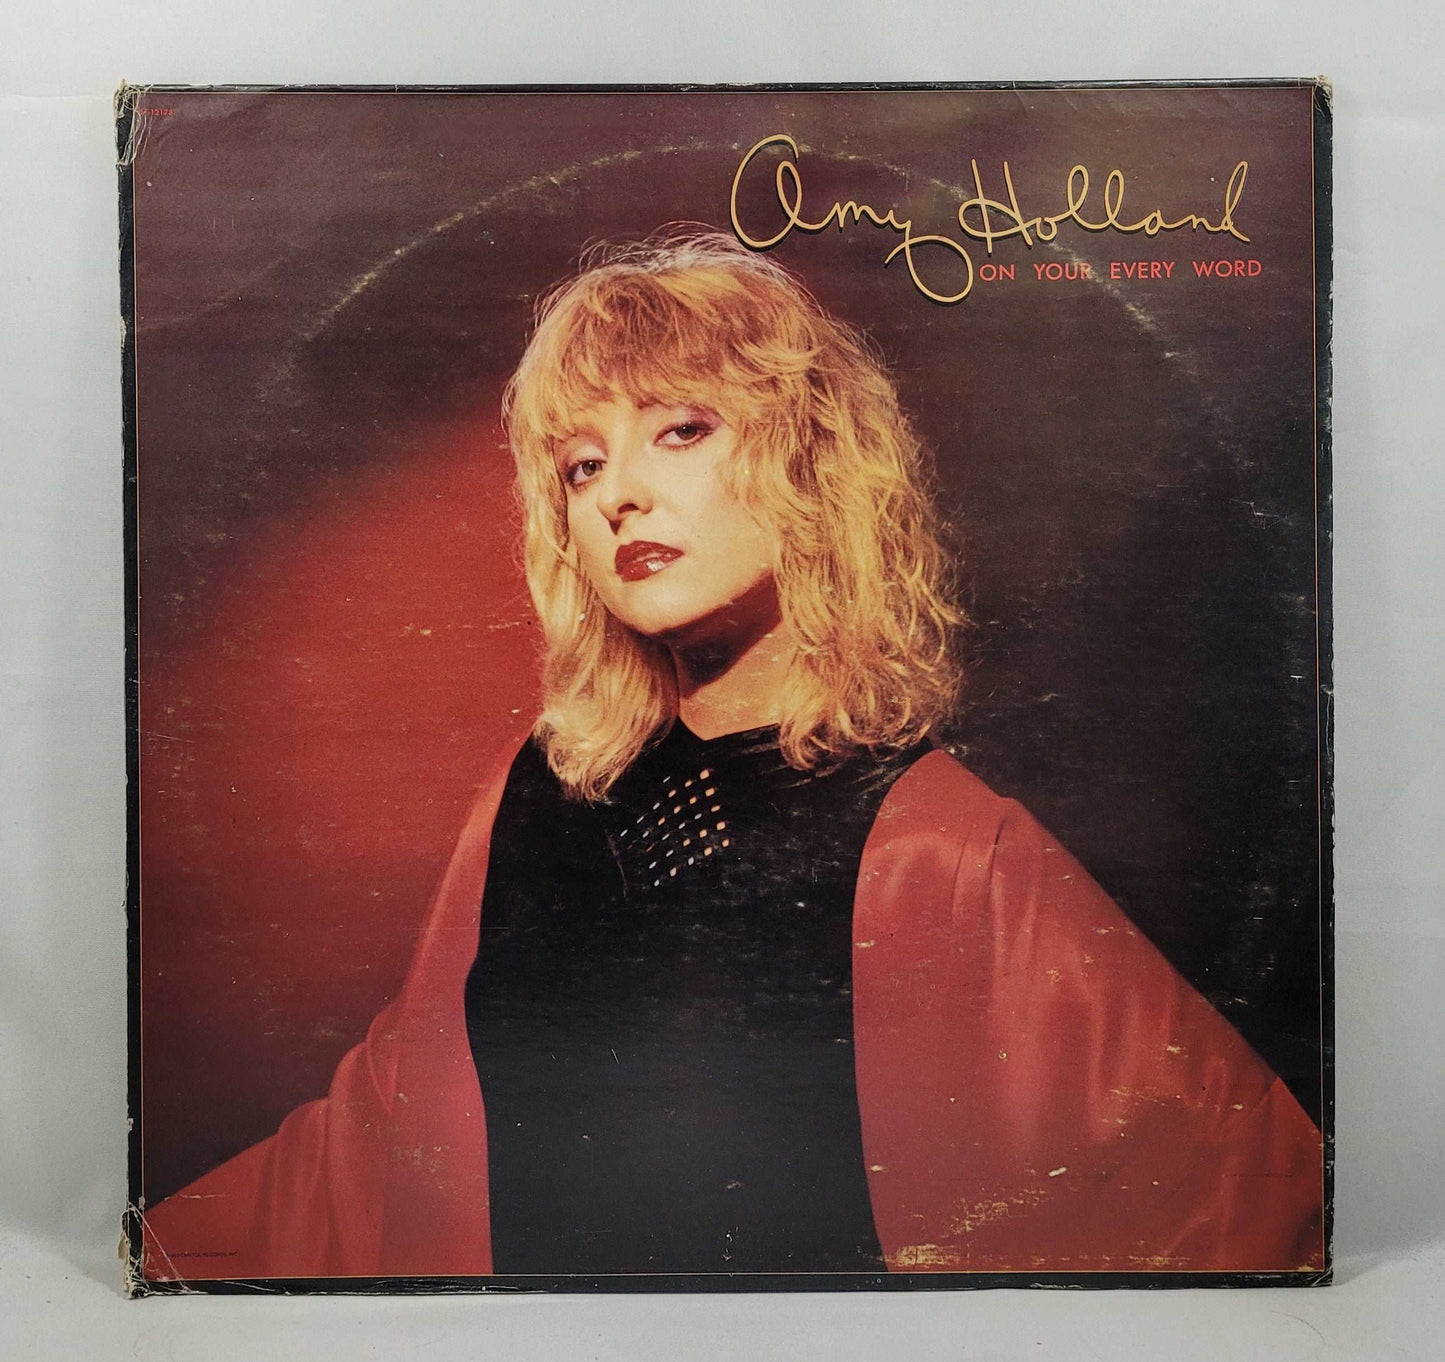 Amy Holland - On Your Every Word [1983 Used Vinyl Record LP]